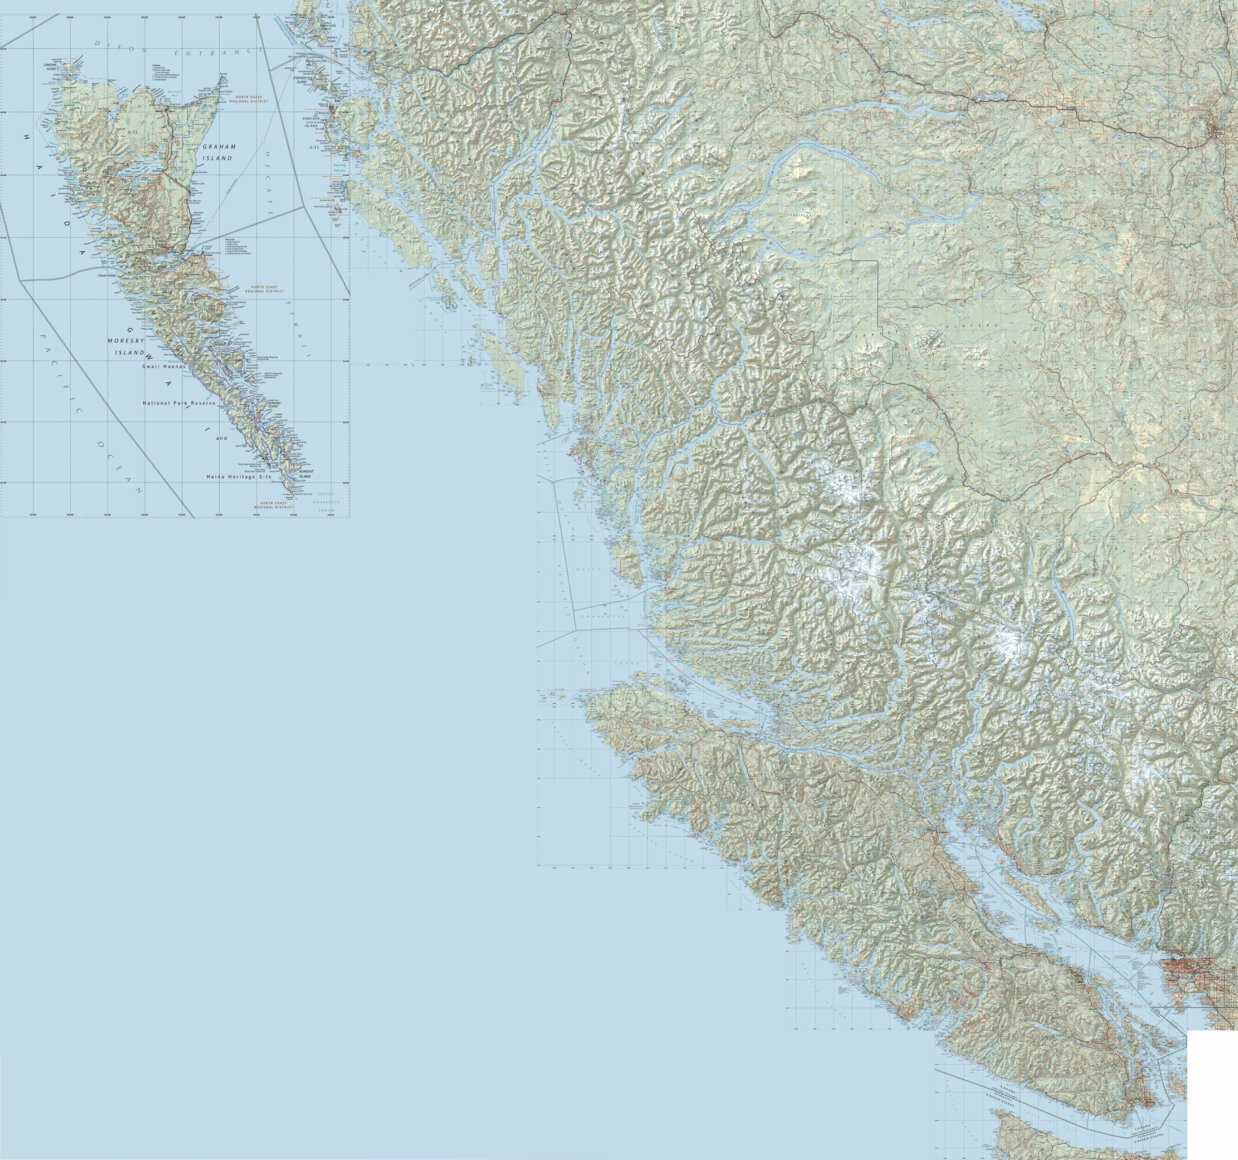 British Columbia Southwest Landscape Map by East View Map Link